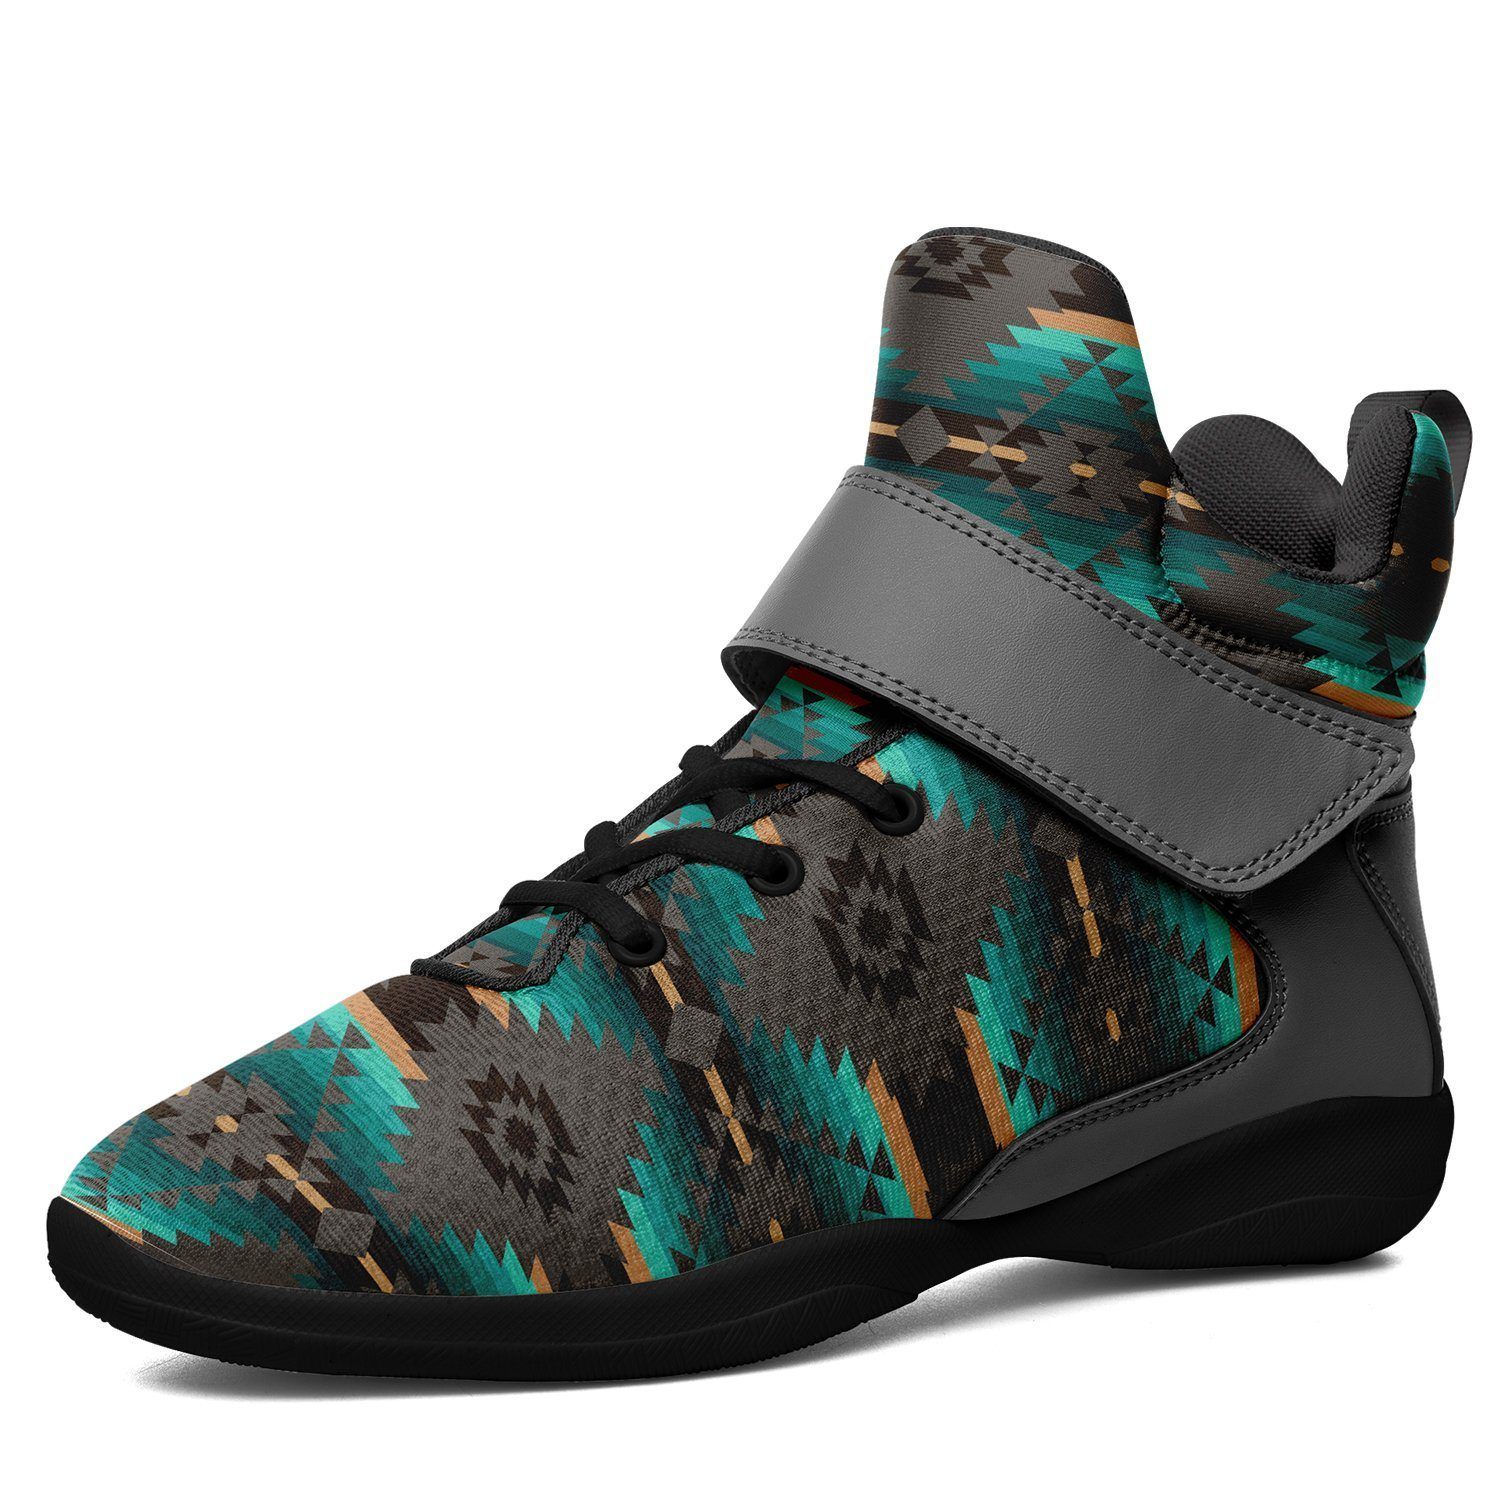 Cree Confederacy Ipottaa Basketball / Sport High Top Shoes - Black Sole 49 Dzine US Men 7 / EUR 40 Black Sole with Gray Strap 